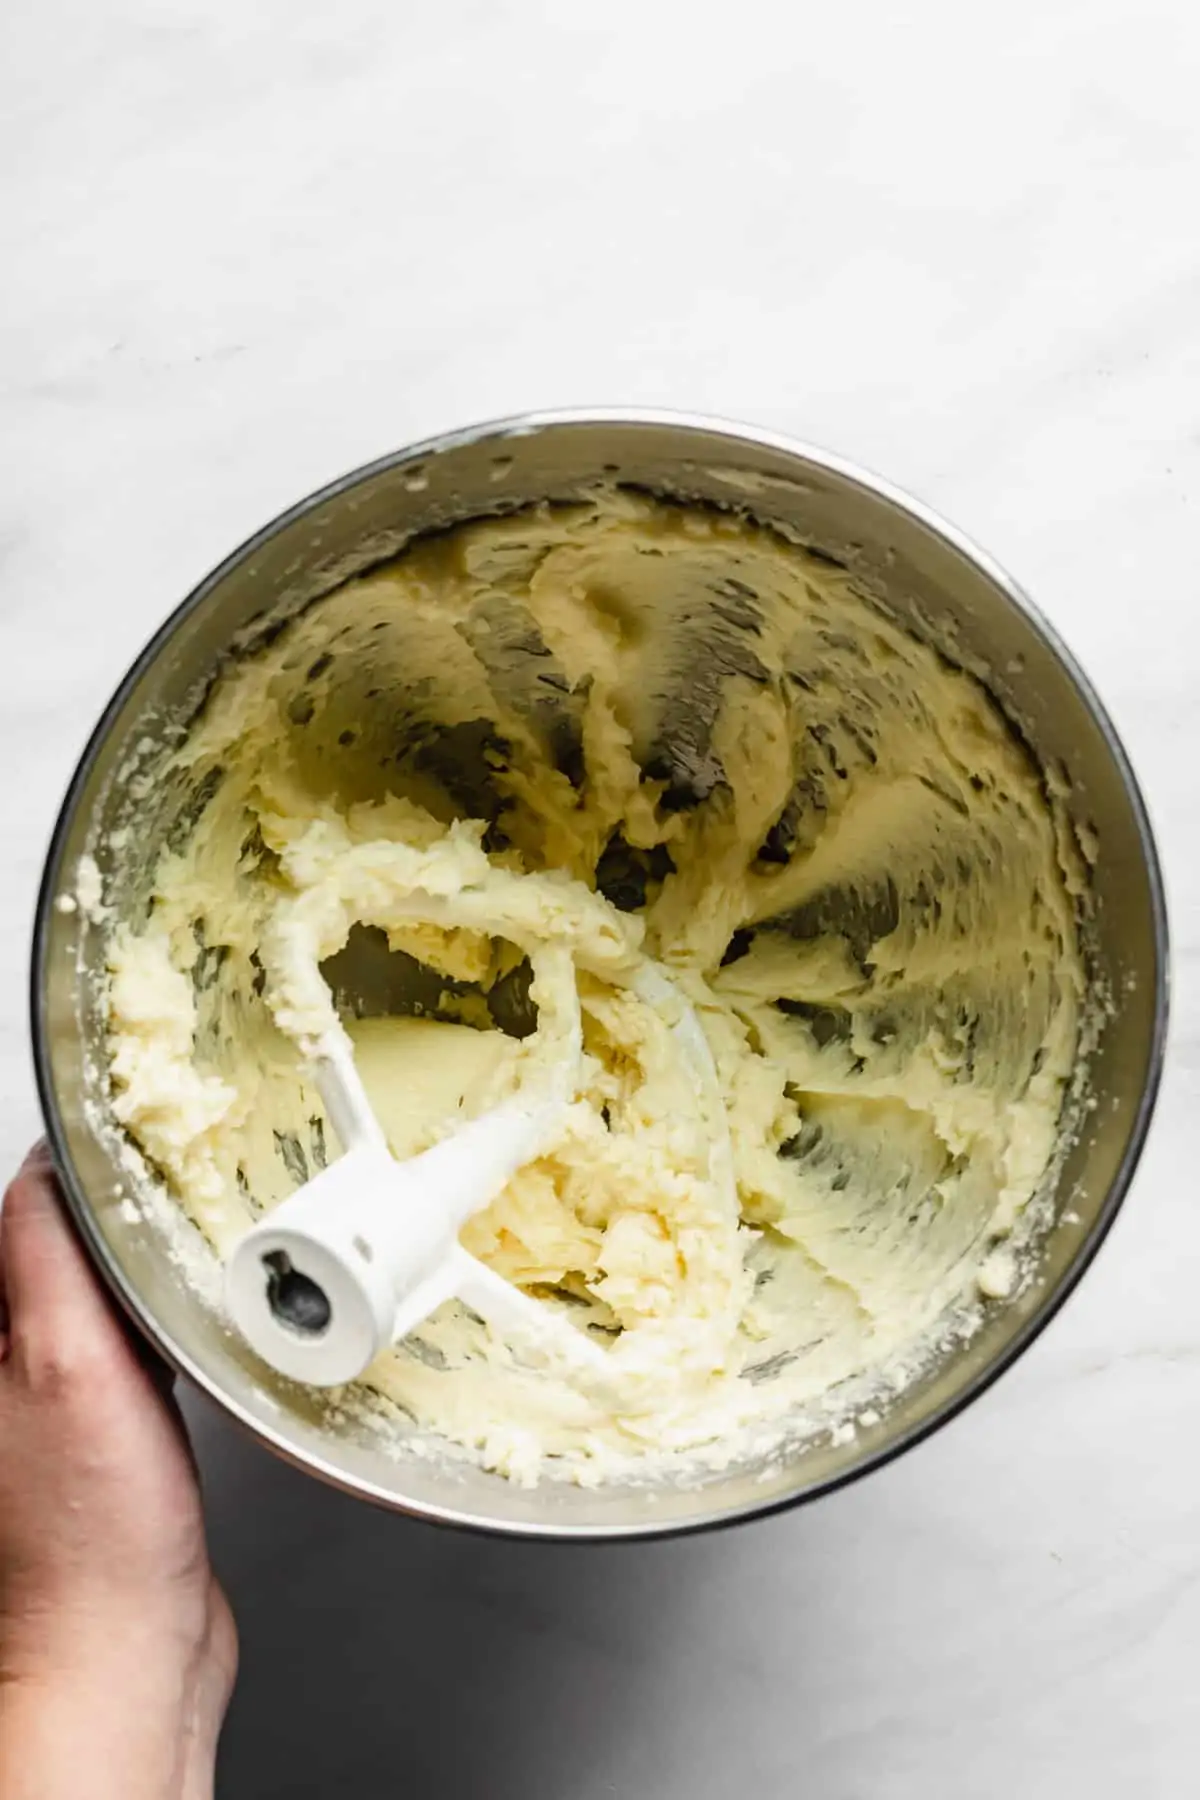 Creamed butter and sugar in a bowl.